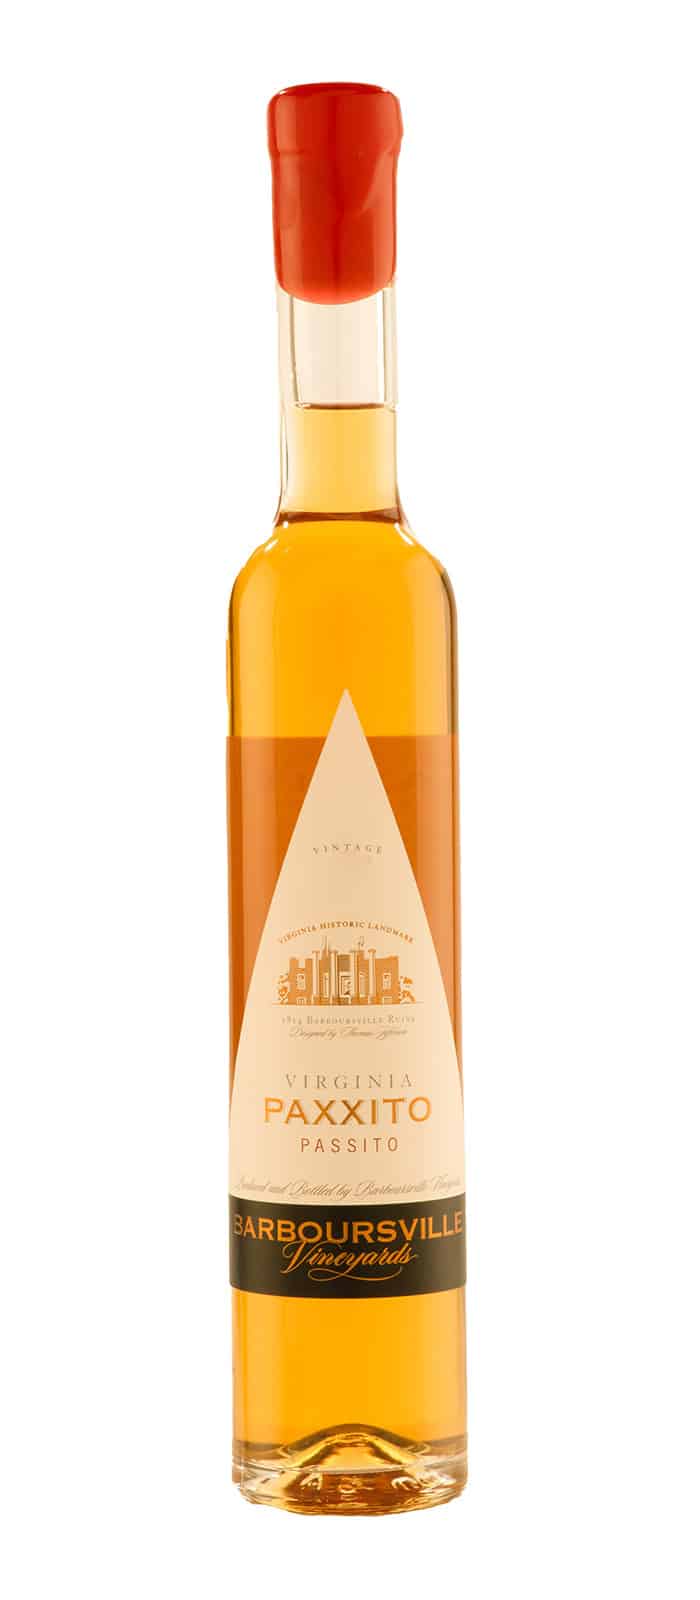 Bottle of Barboursville Vineyards 2019 Paxxito, Gold Medal, Virginia Governor's Cup Wine Competition.